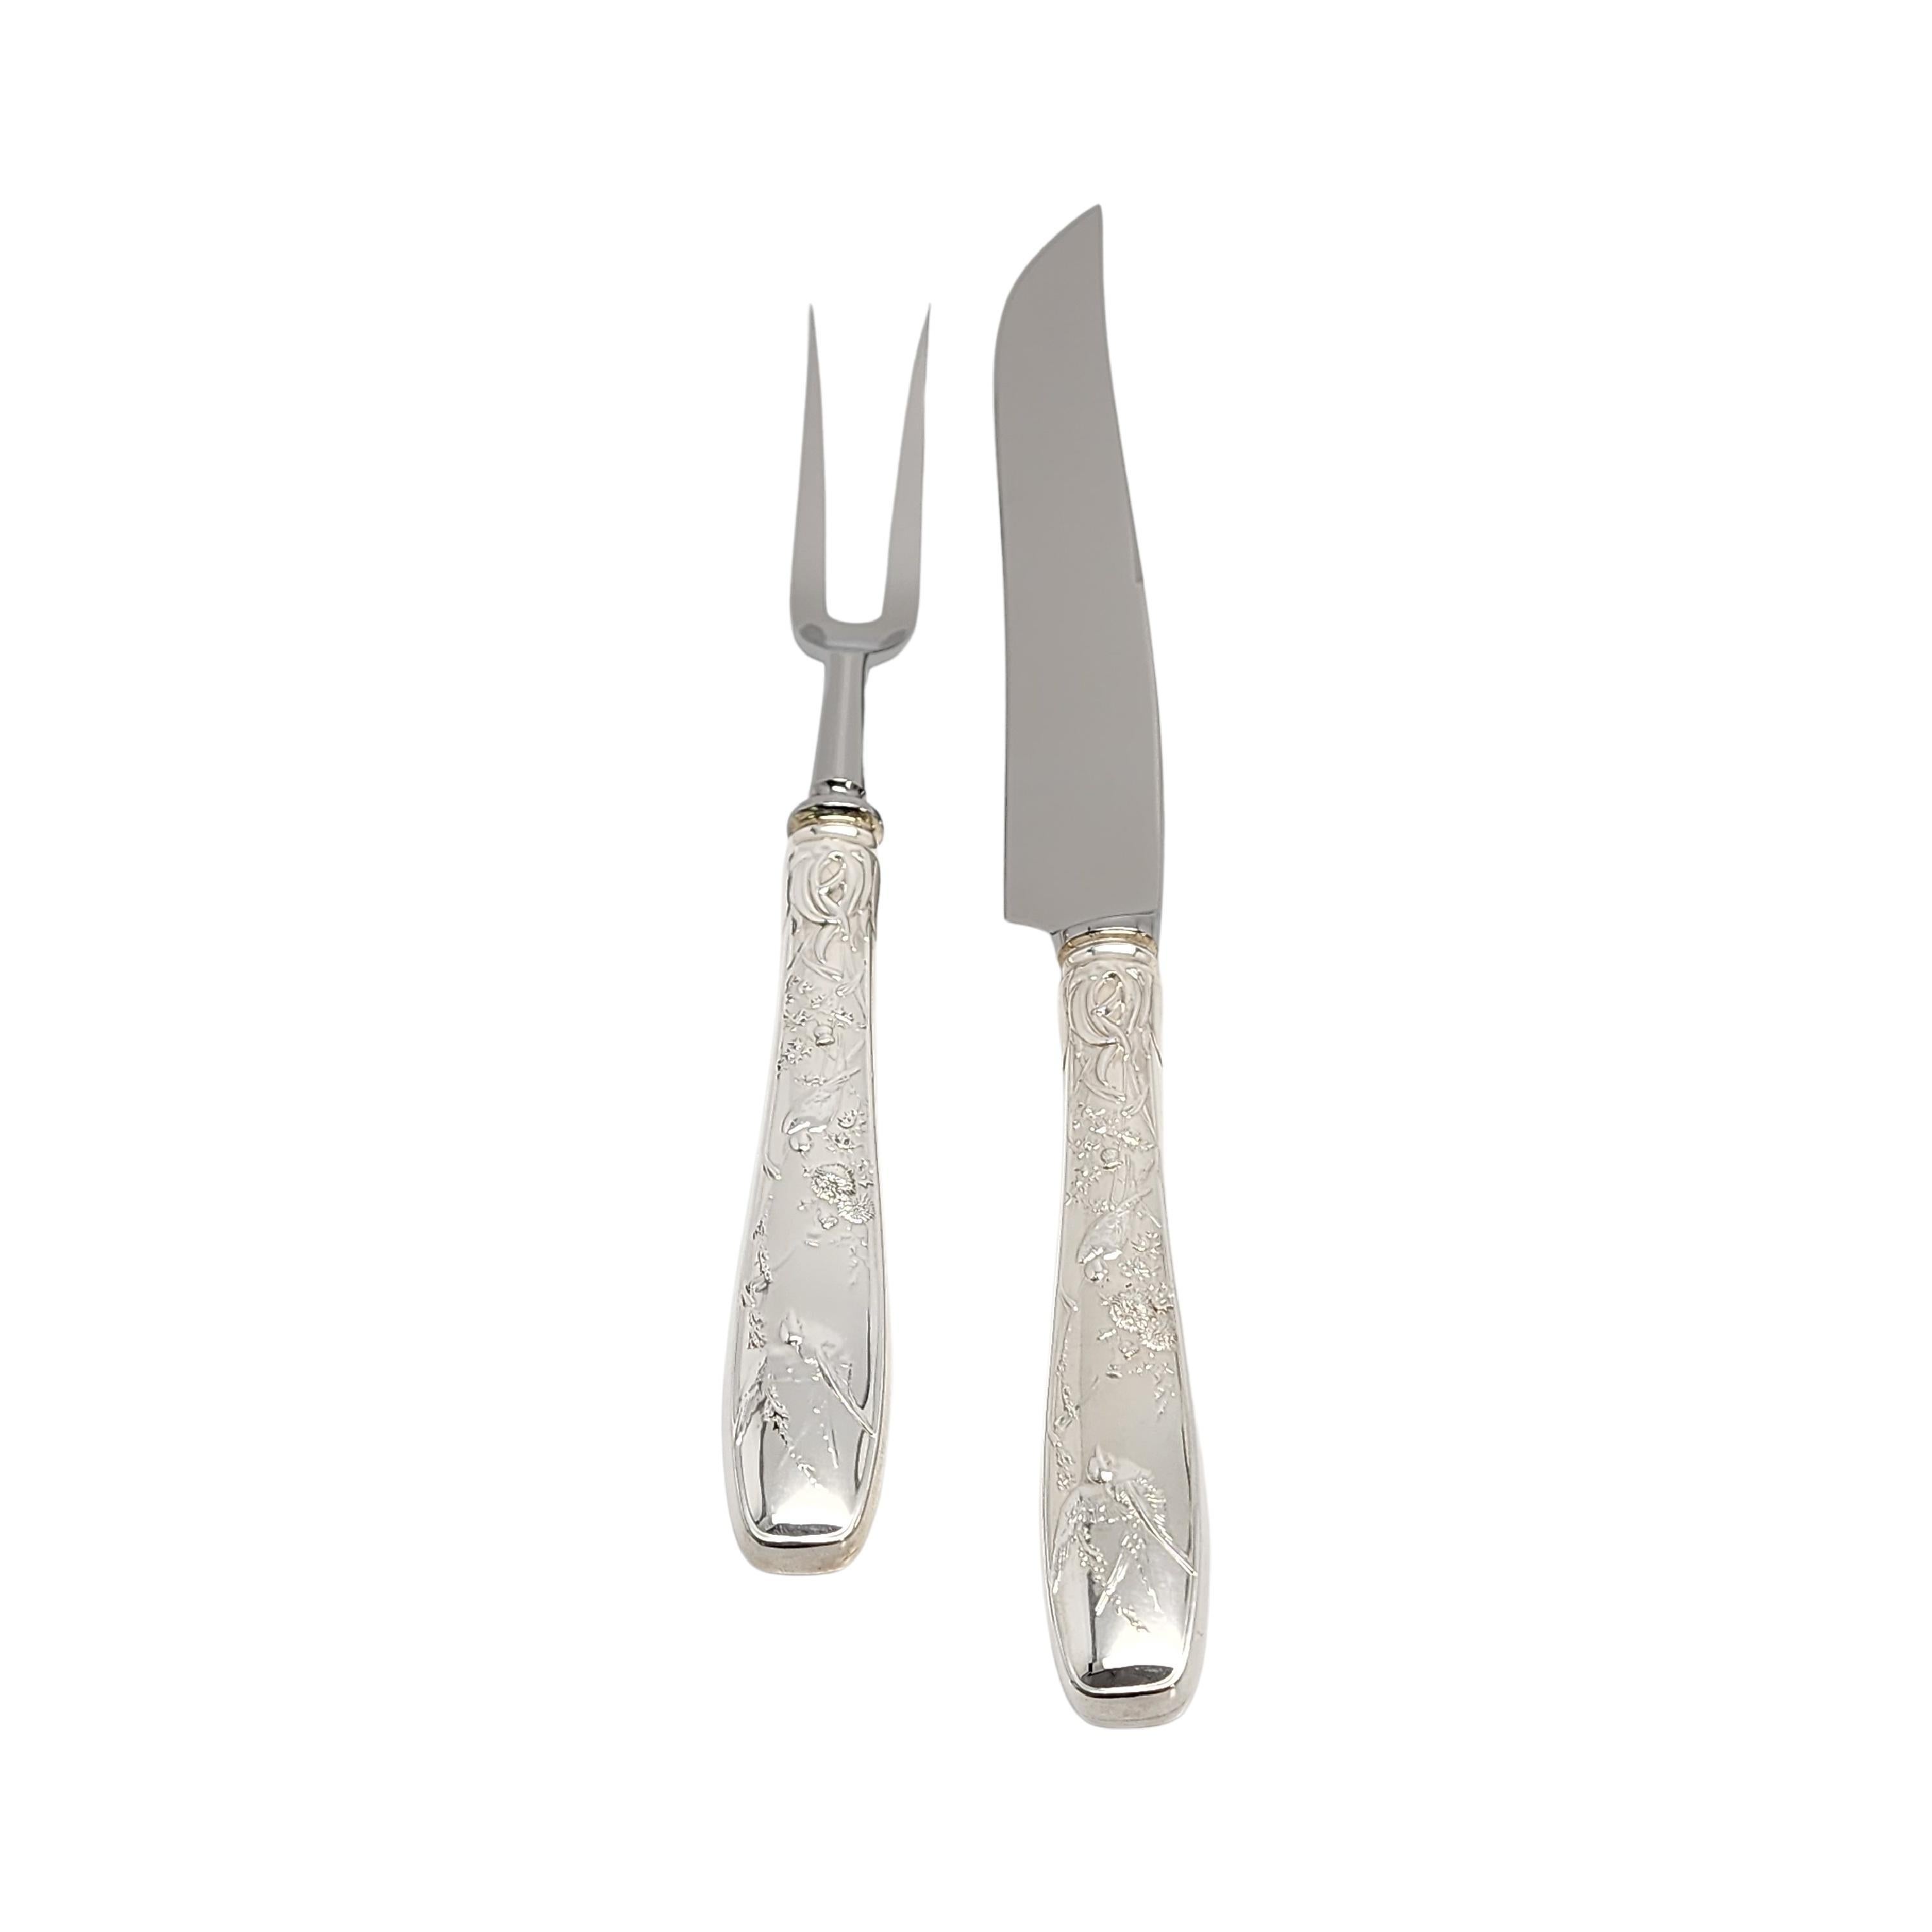 Sterling silver carving set with knife and fork by Tiffany & Co in the Audubon pattern with pouch.

No monogram

Designed by Edward C. Moore in 1871, the Audubon pattern was inspired by Japanese bird paintings of the 19th century. This 2 piece set